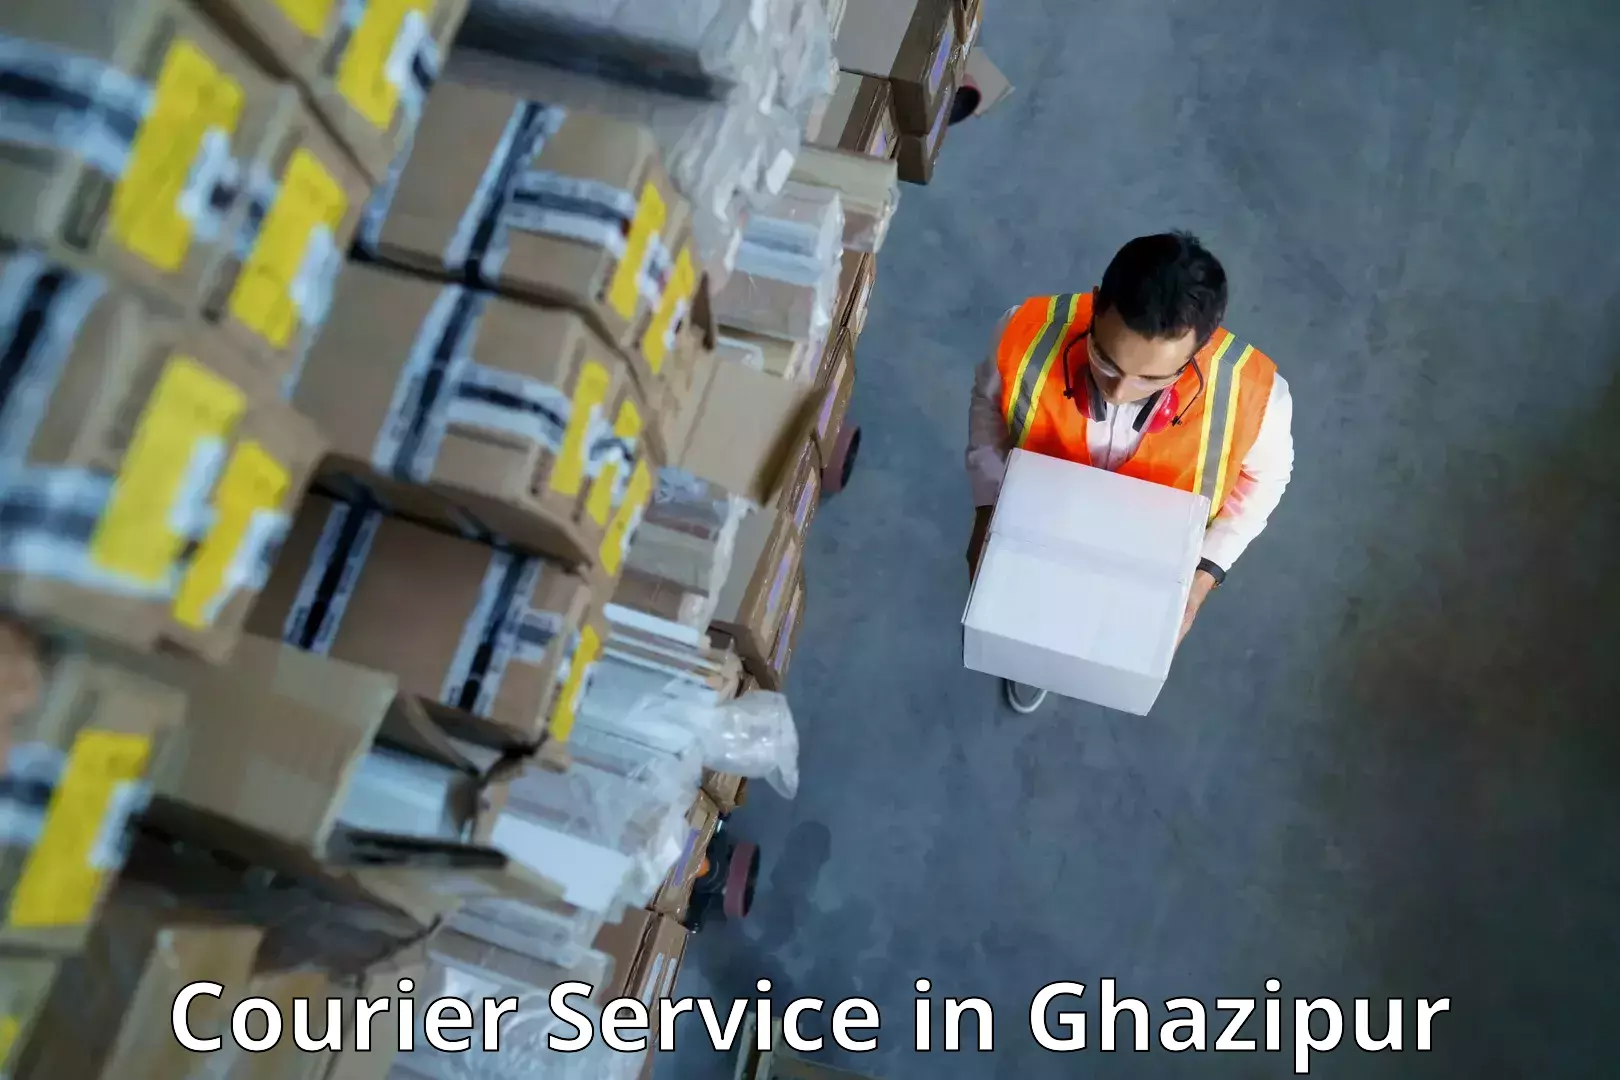 Logistics and distribution in Ghazipur